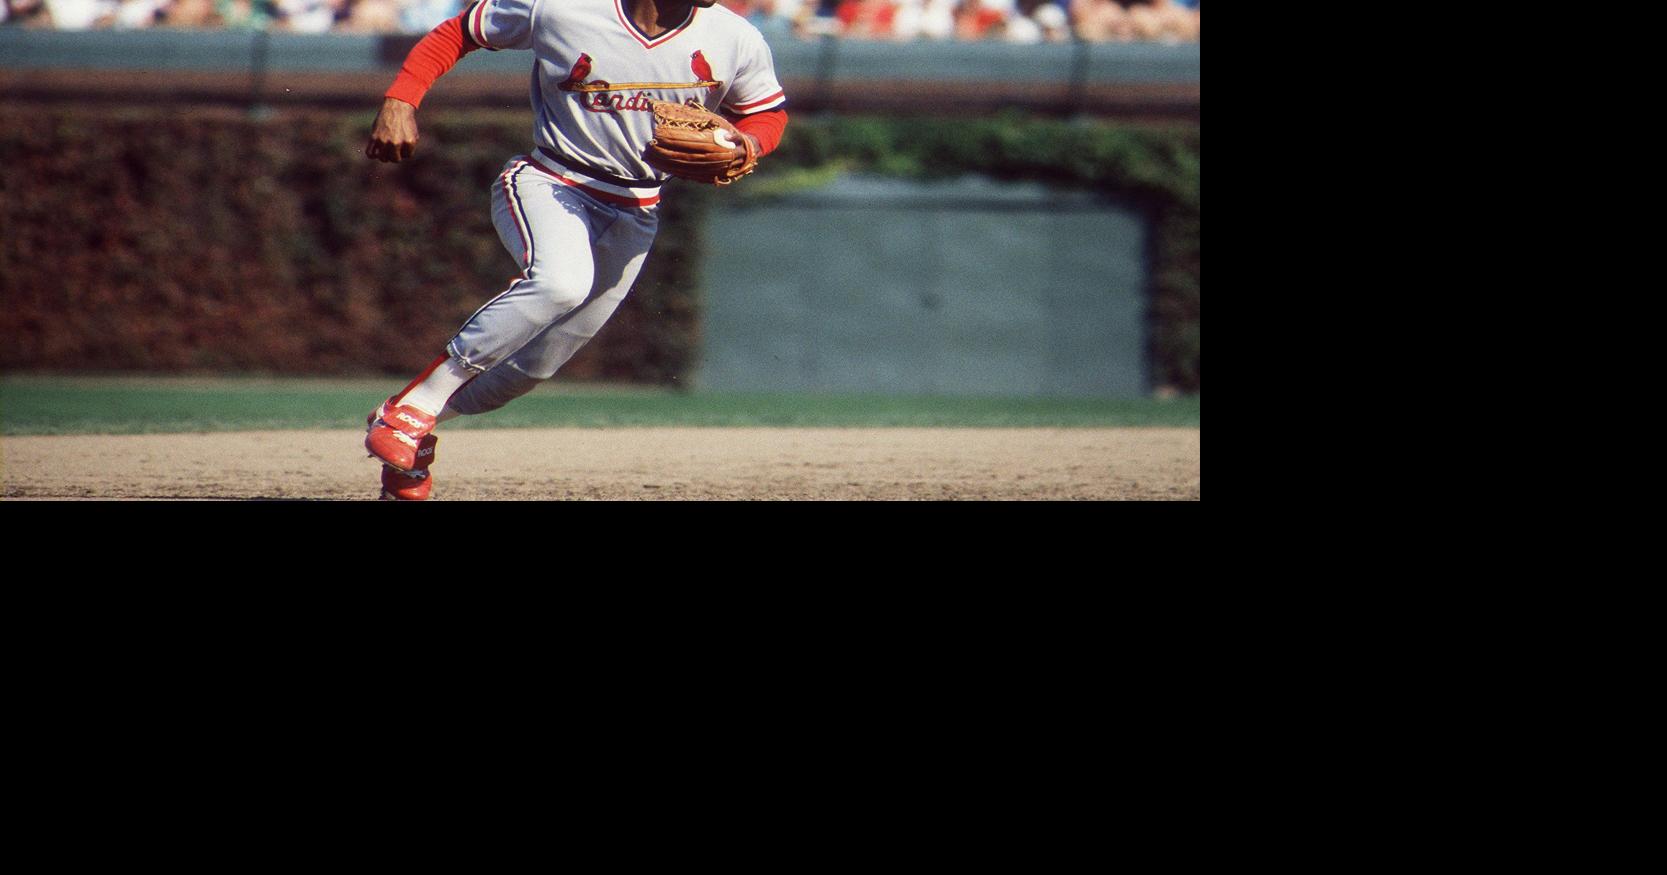 Ozzie Smith's career WAR score is ranked 44th at 76.4. His career